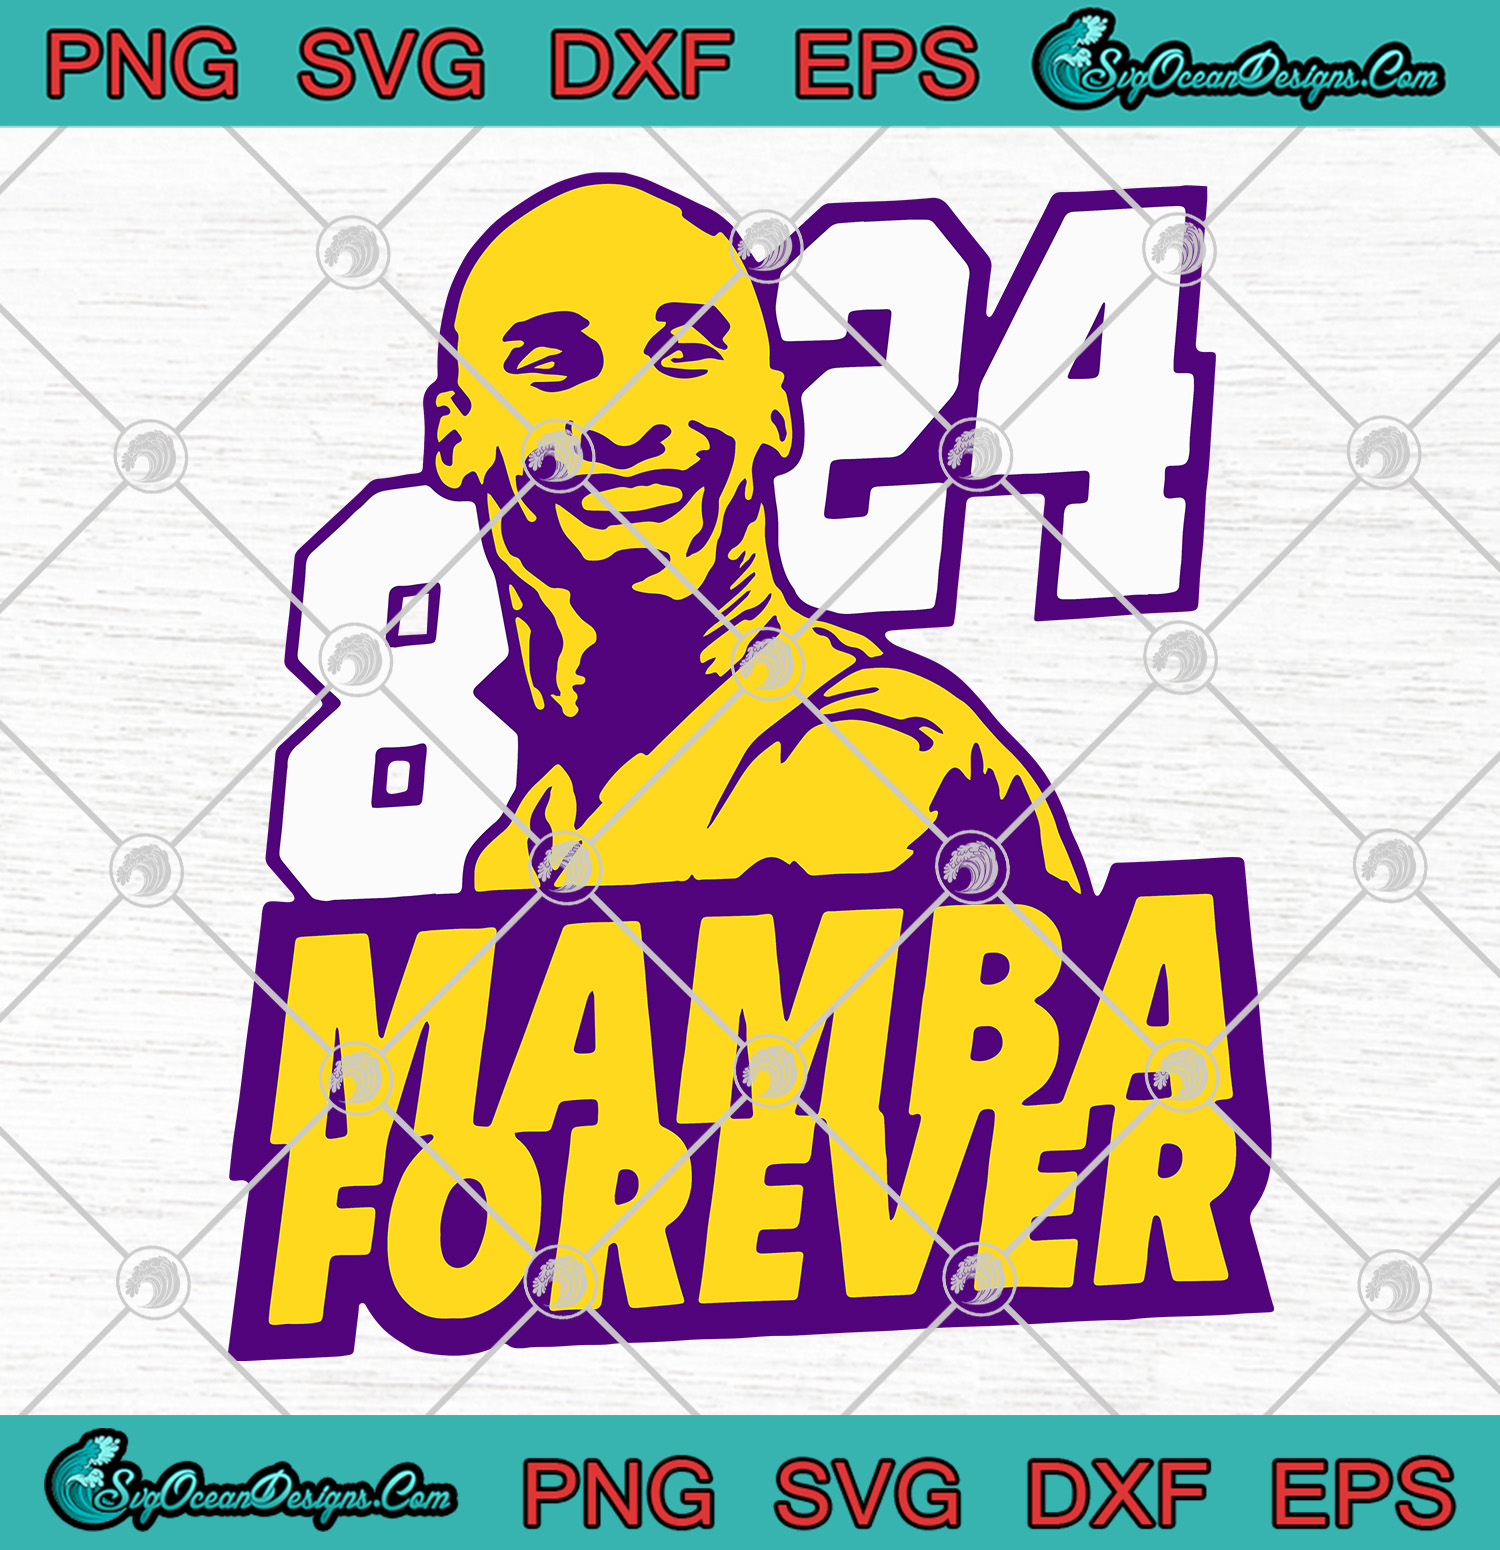 Download Legends Are Forever Mamba Out 24 SVG PNG-RIP Mamba SVG-Basketball Fan 24 SVG - Designs Digital ...